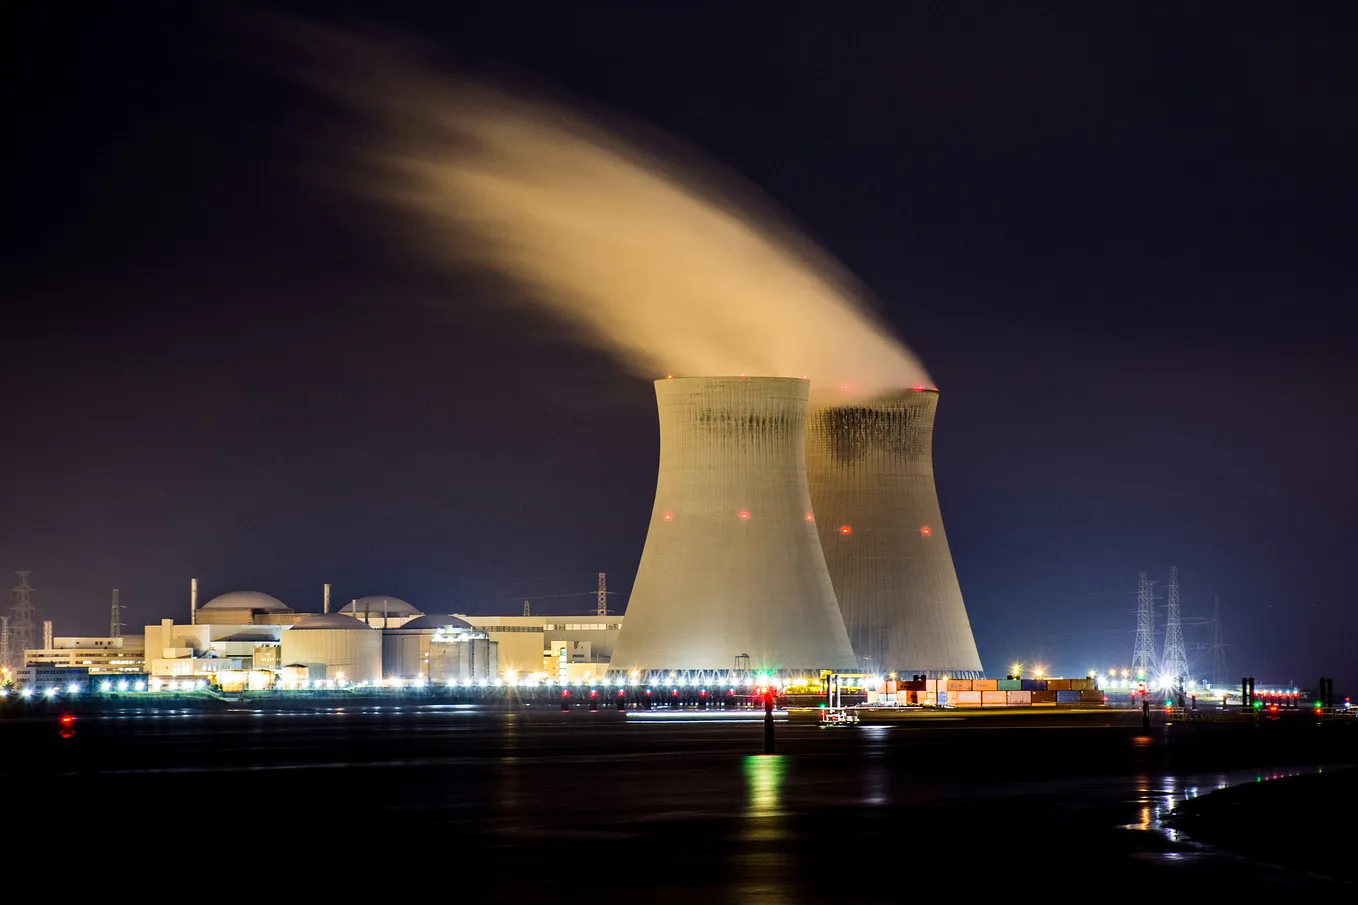 Why Nuclear Power Plant seen as expensive investment rather that it seems?